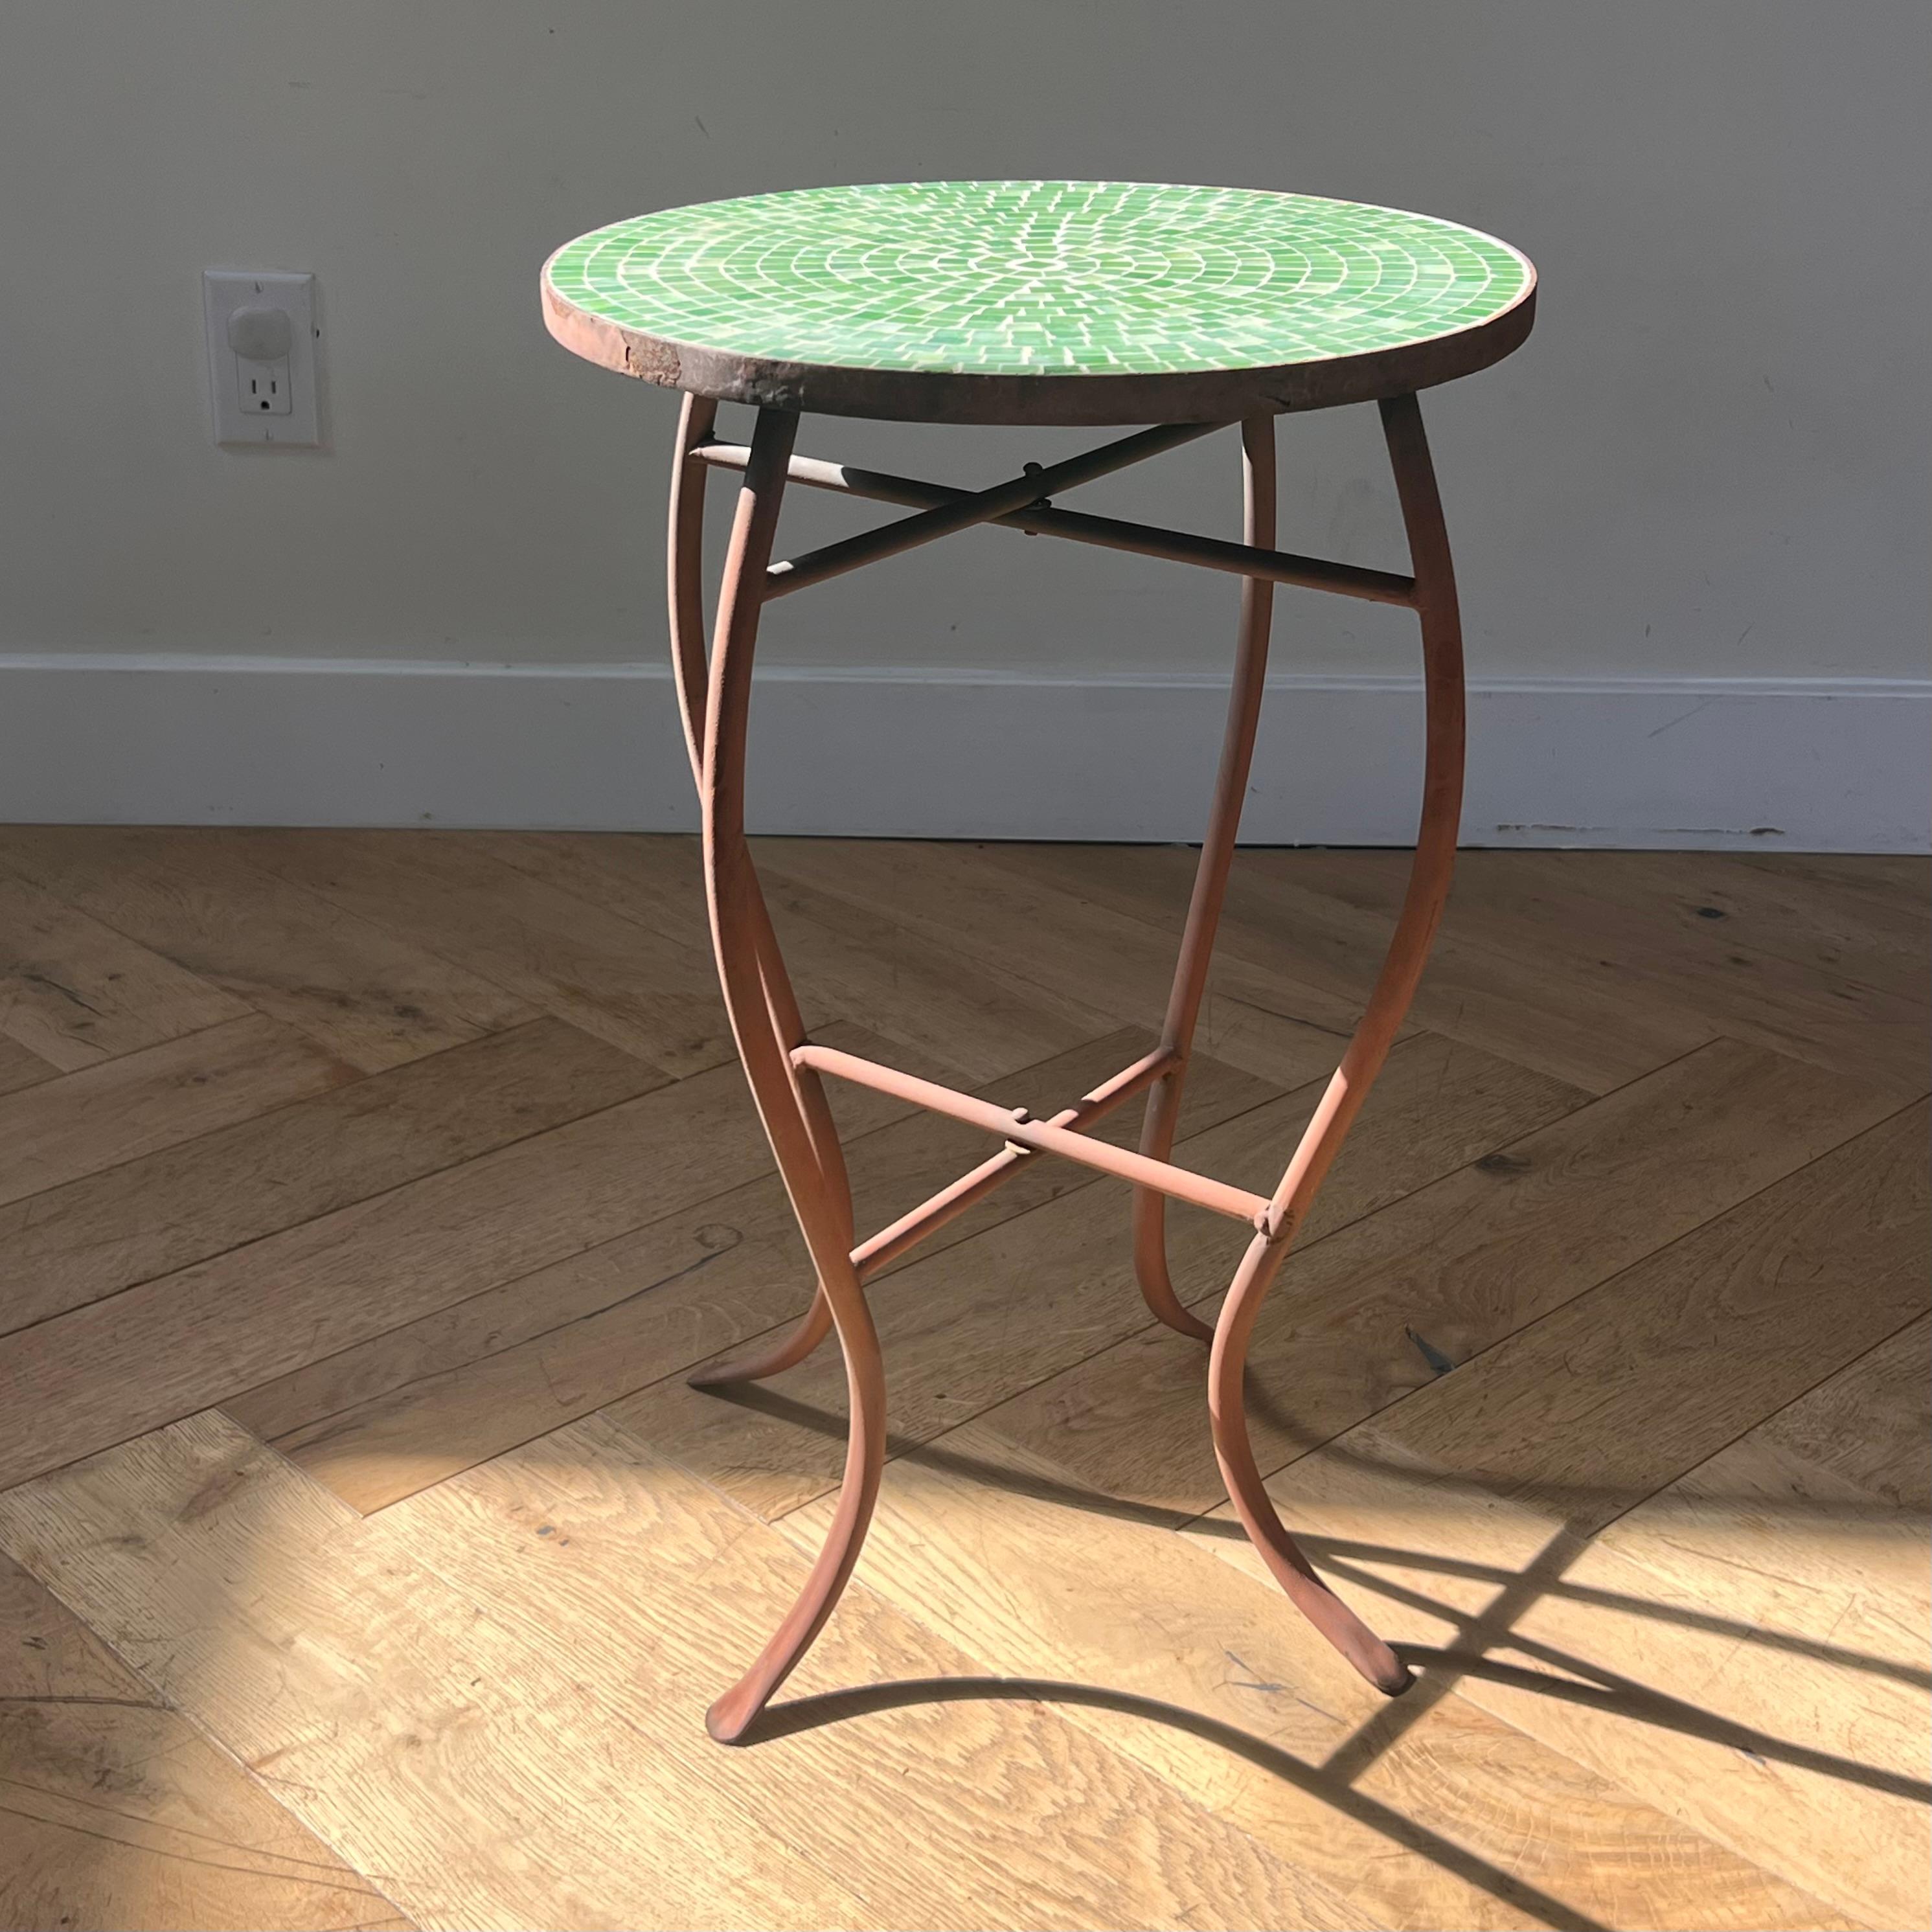 A mid century iron and green mosaic tile side table, early 1960s. Tones of green range from grass green to vermillion and chartreuse. Some insignificant wear; see pics. Pick up in central west Los Angeles or we ship worldwide. 
14” diameter X 21”